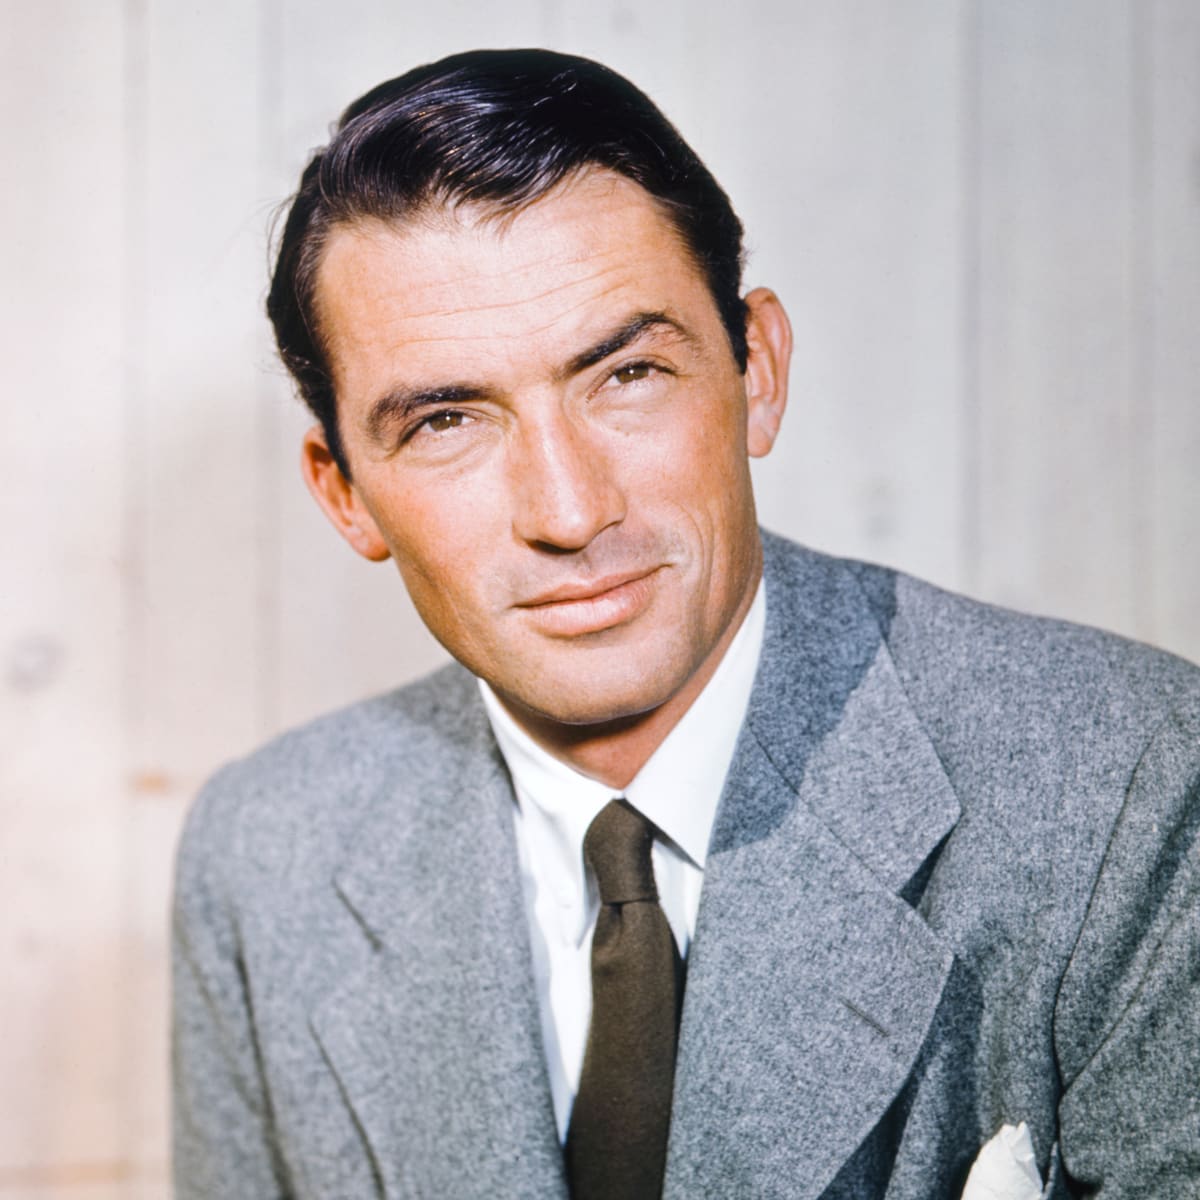 If You Can Score Full Marks on This 1940s Actors Quiz, You Are No Doubt a Boomer Gregory Peck